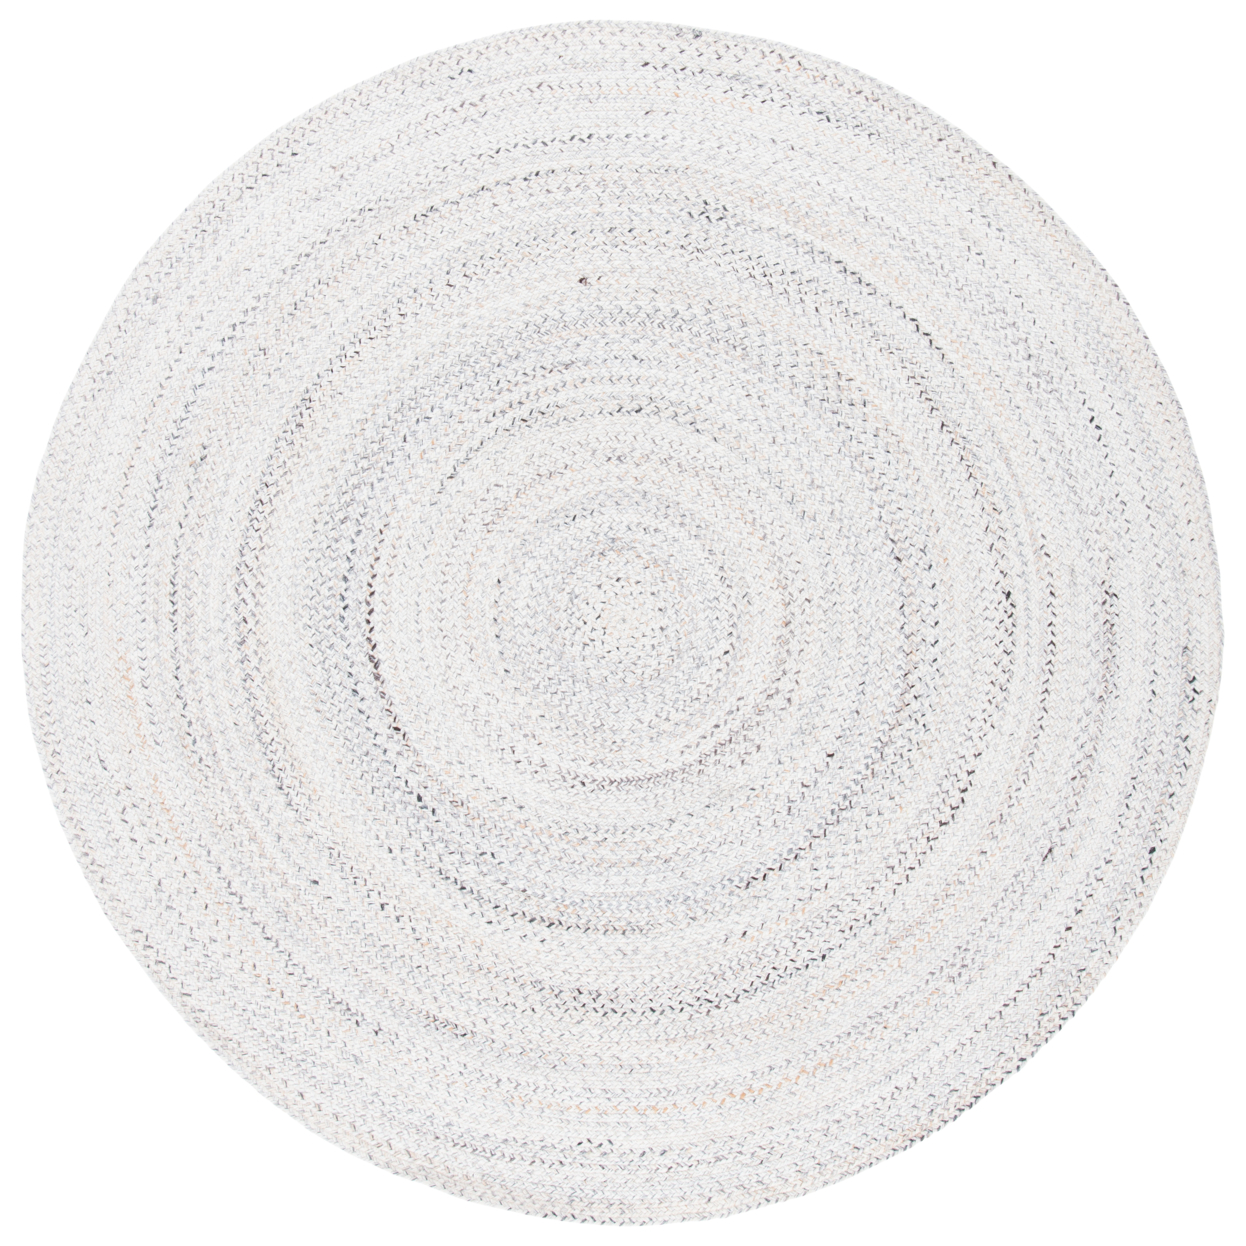 SAFAVIEH Braided Collection BRD851A Handwoven Ivory Rug - 6' Round